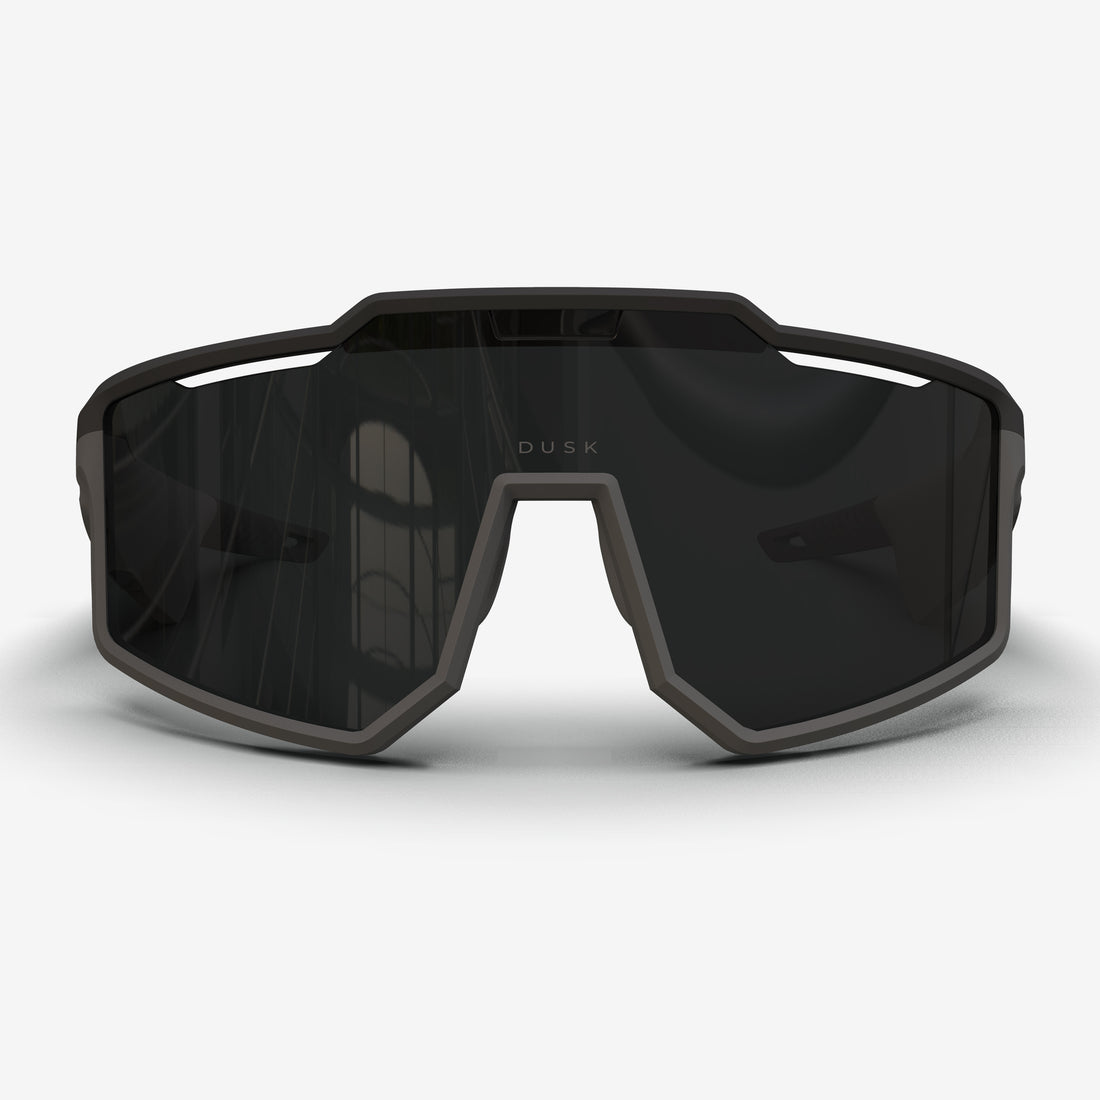 Black Polarized Sports Sunglasses With High Optical Clarity